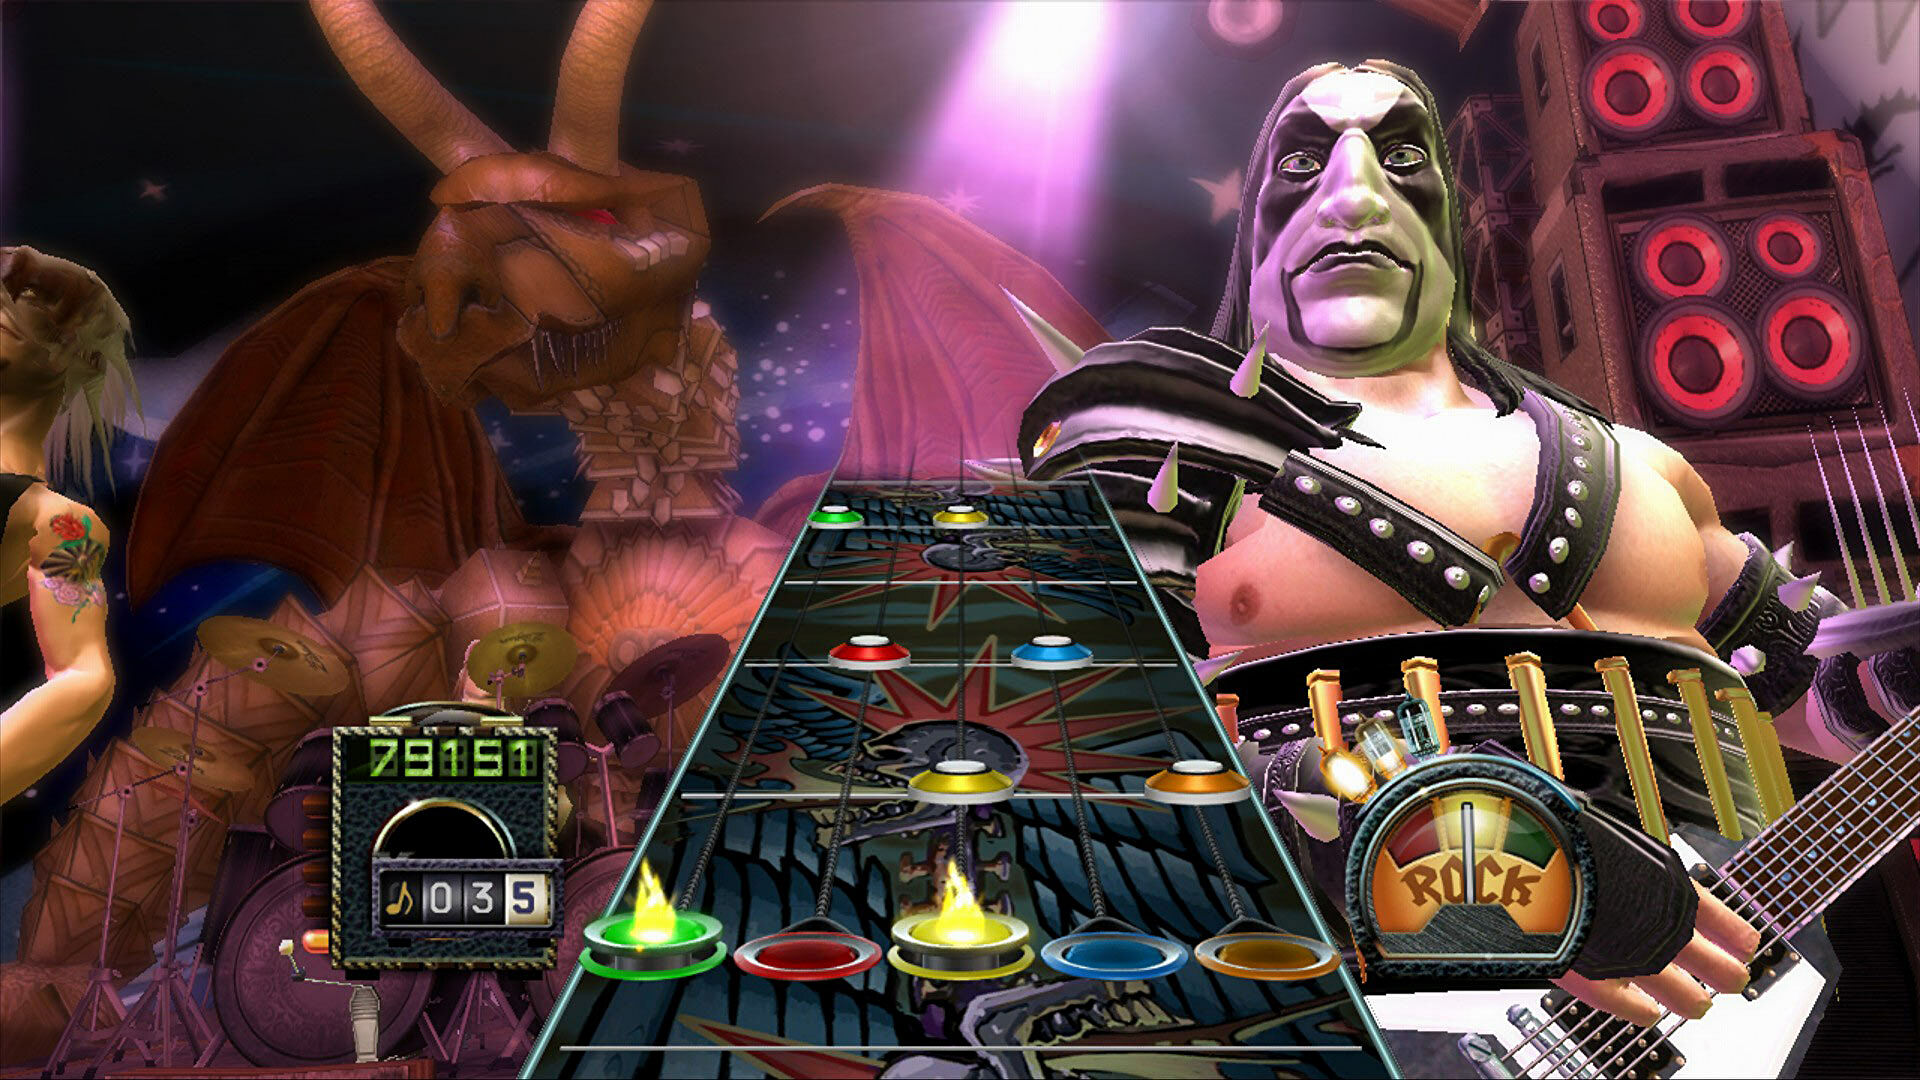 New Guitar Hero Has Redesigned Controller, First Person Perspective